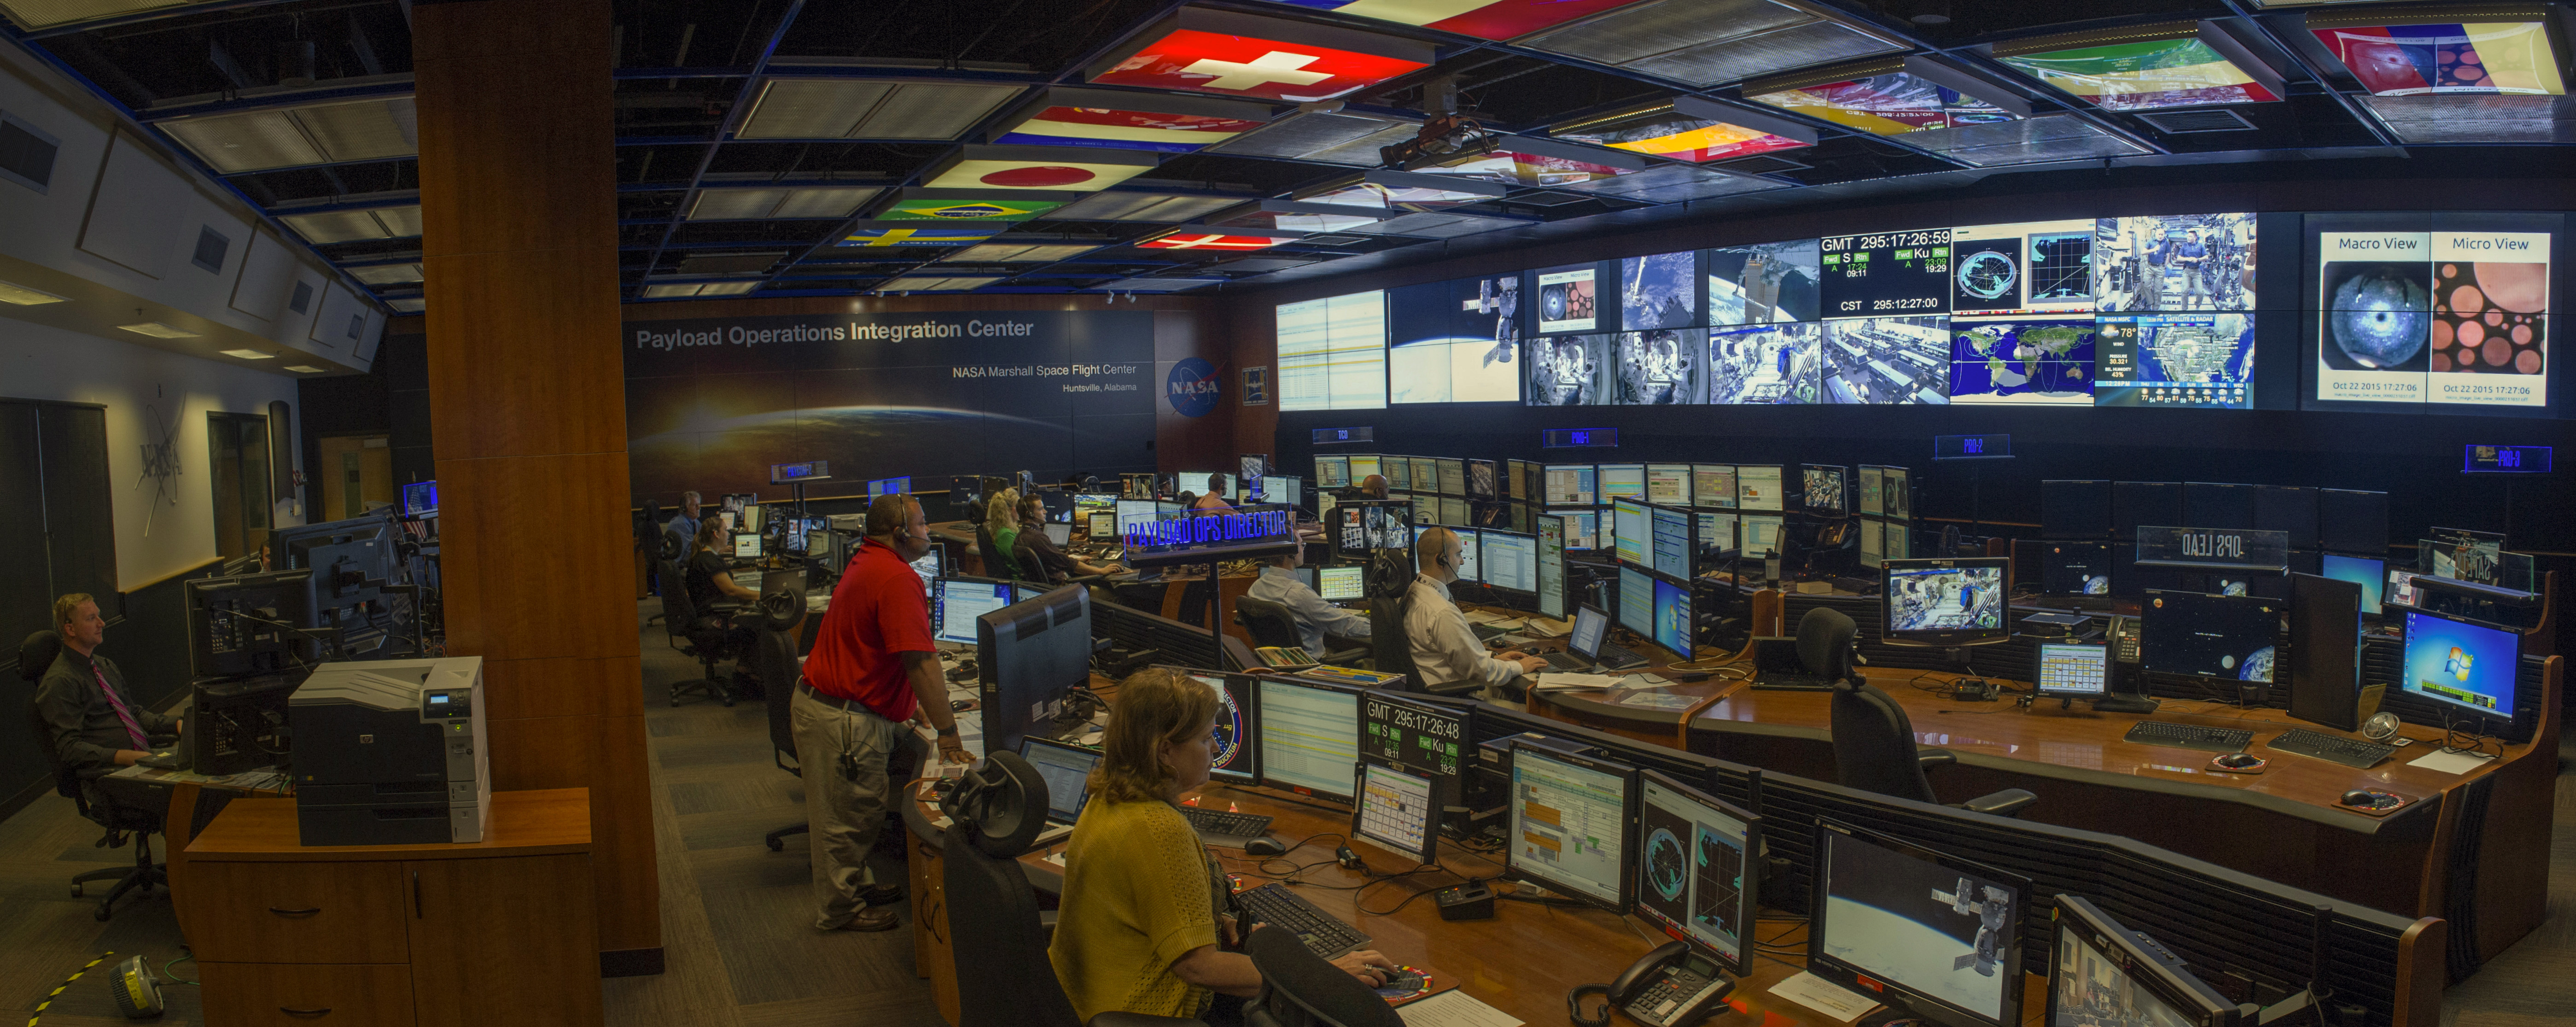 The Payload Operations Integration Center at Marshall Space Flight Center